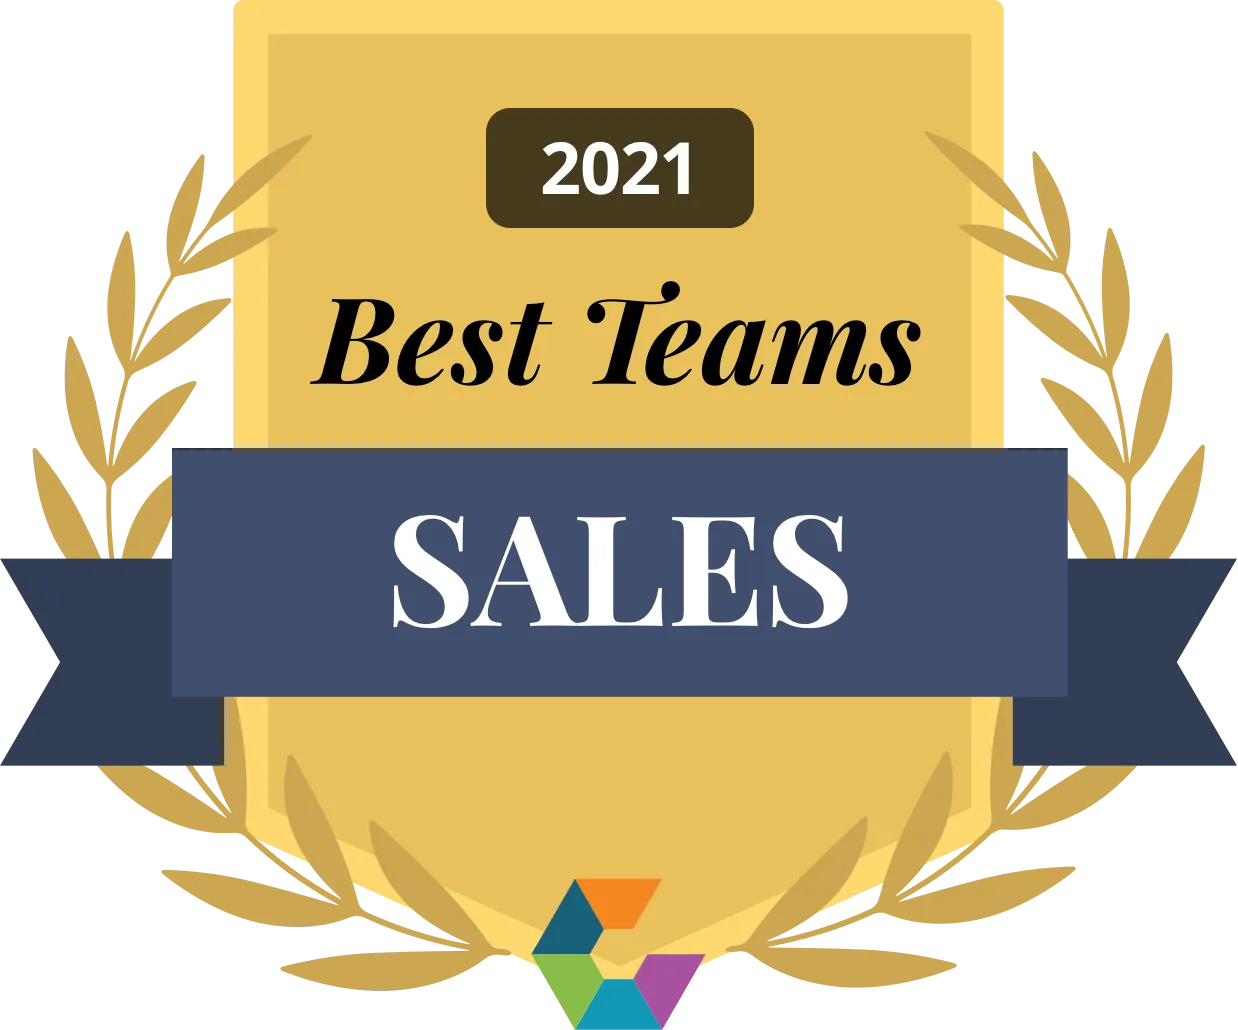 Comparably- Best Team Sales 2021